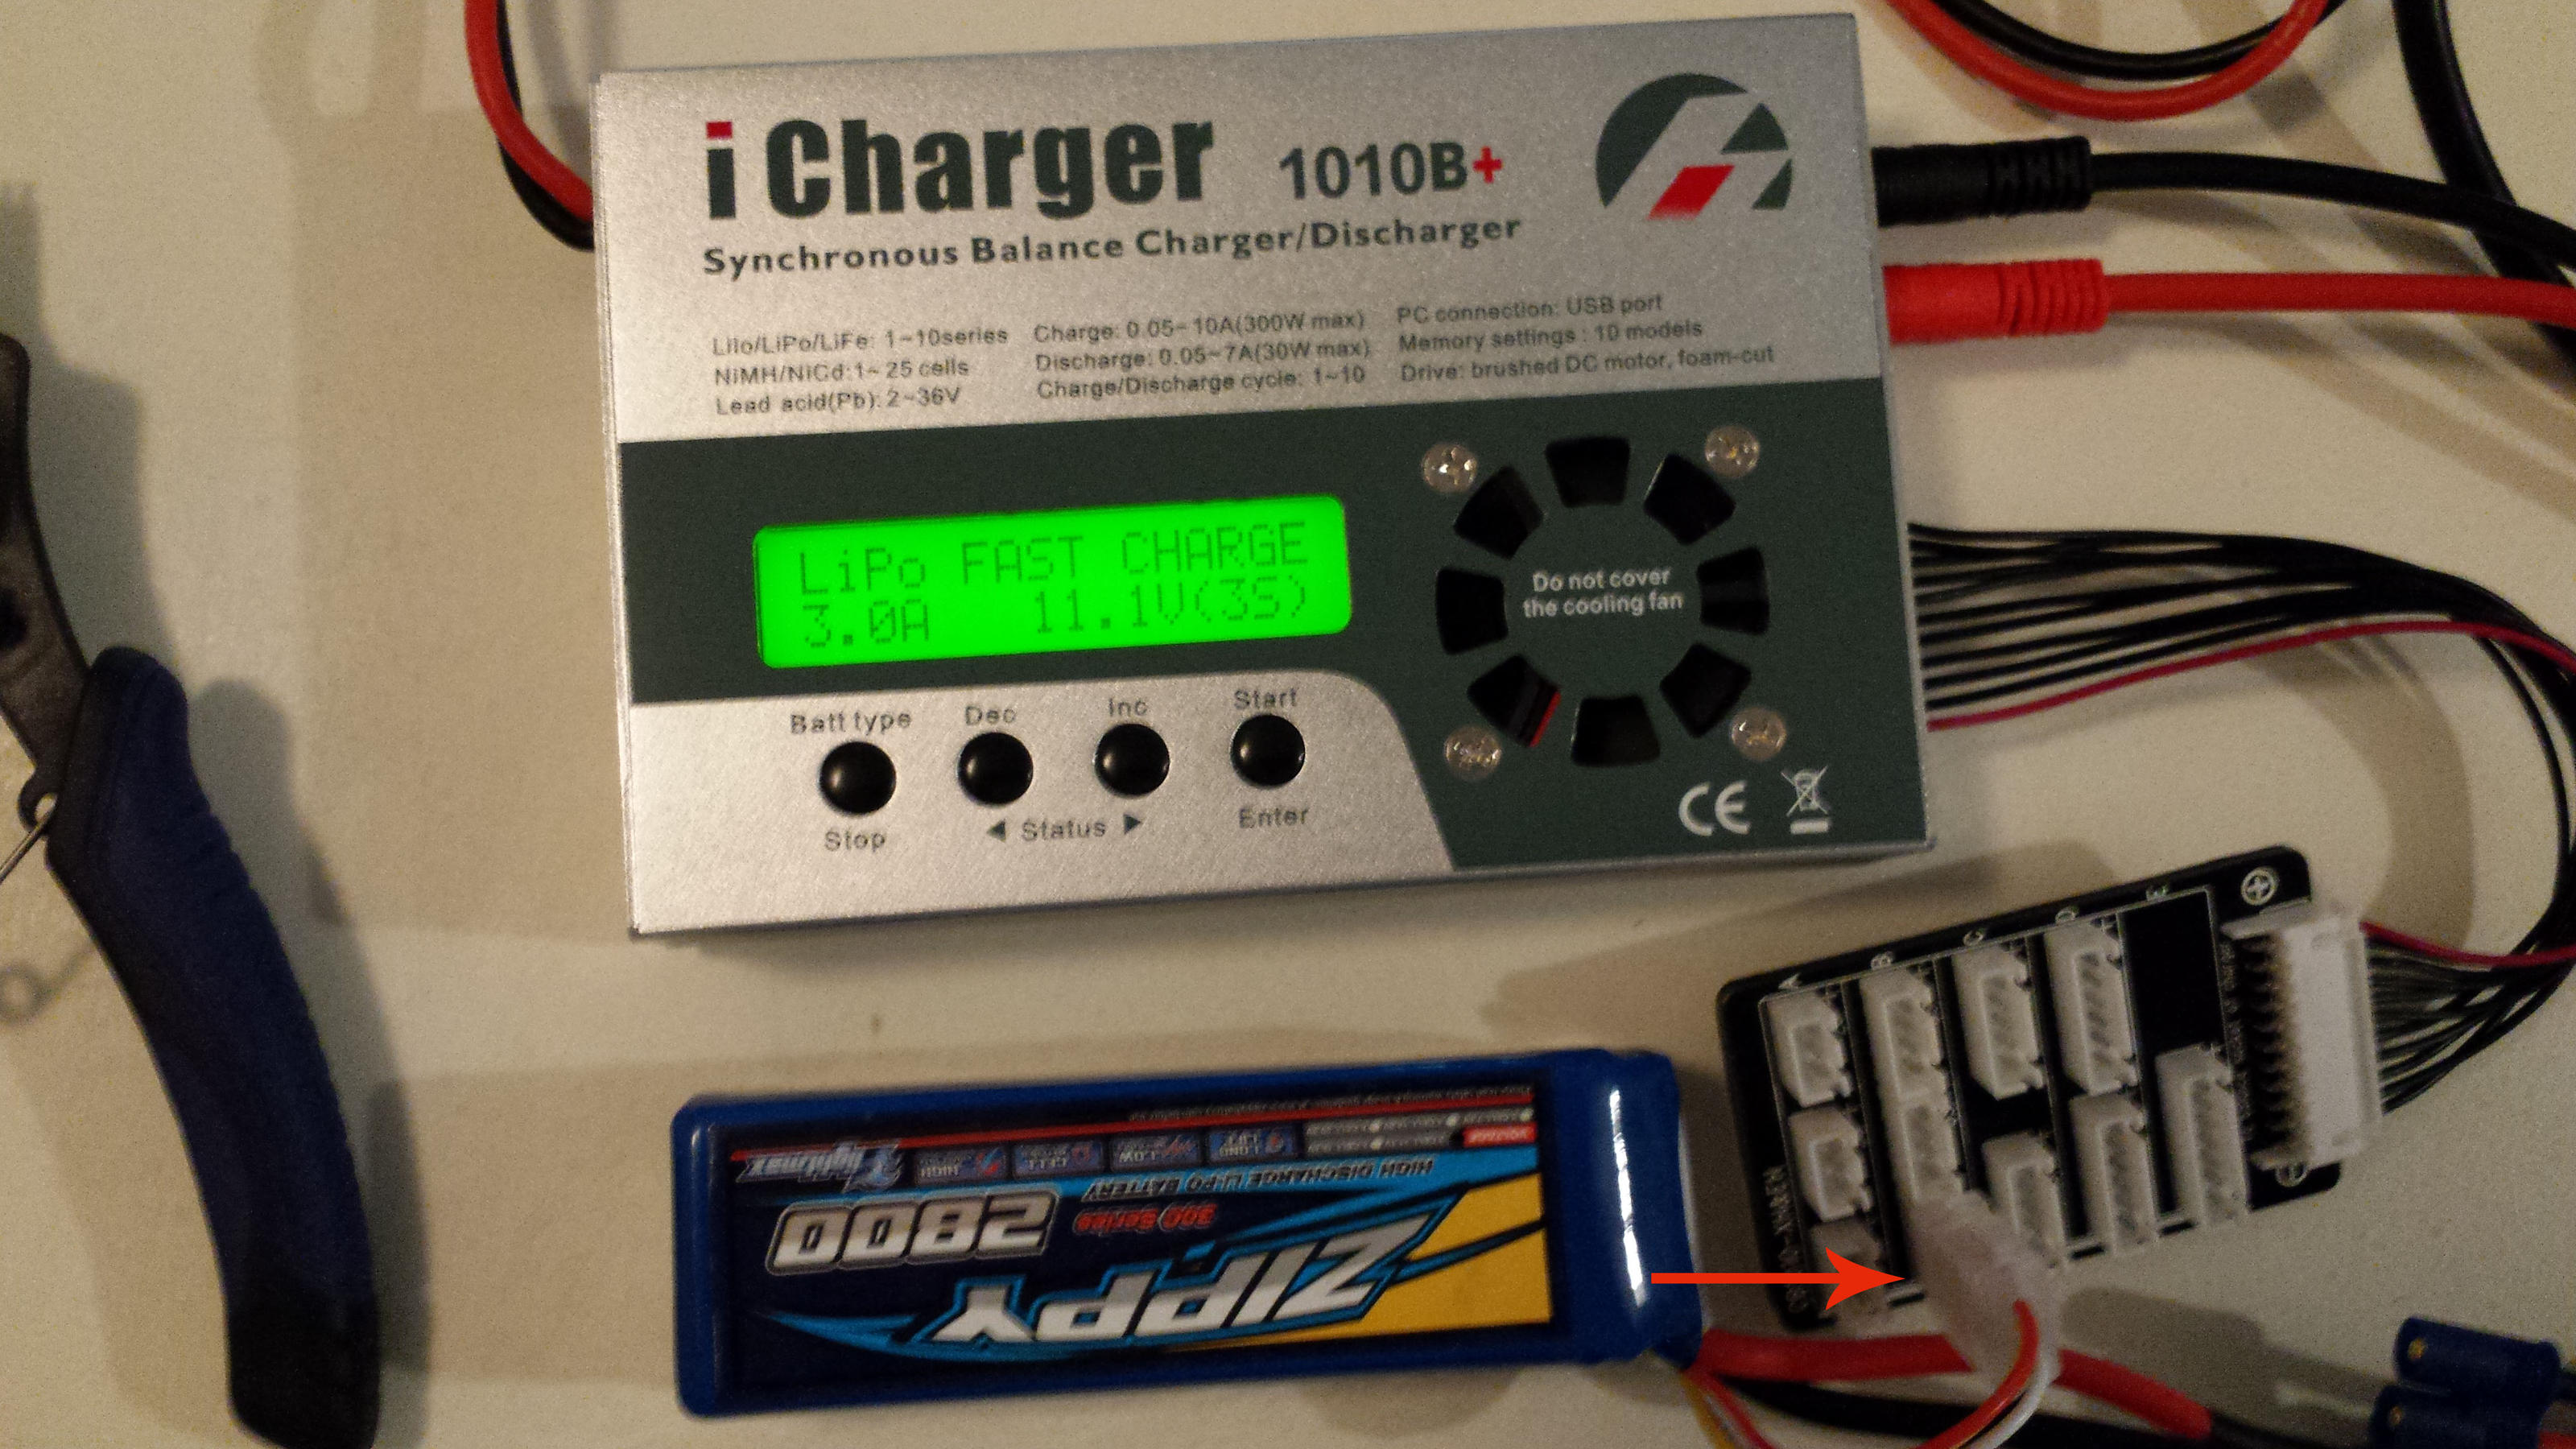 iCharger 206B Synchronous Balance 6S 20A 300W Charger Discharger